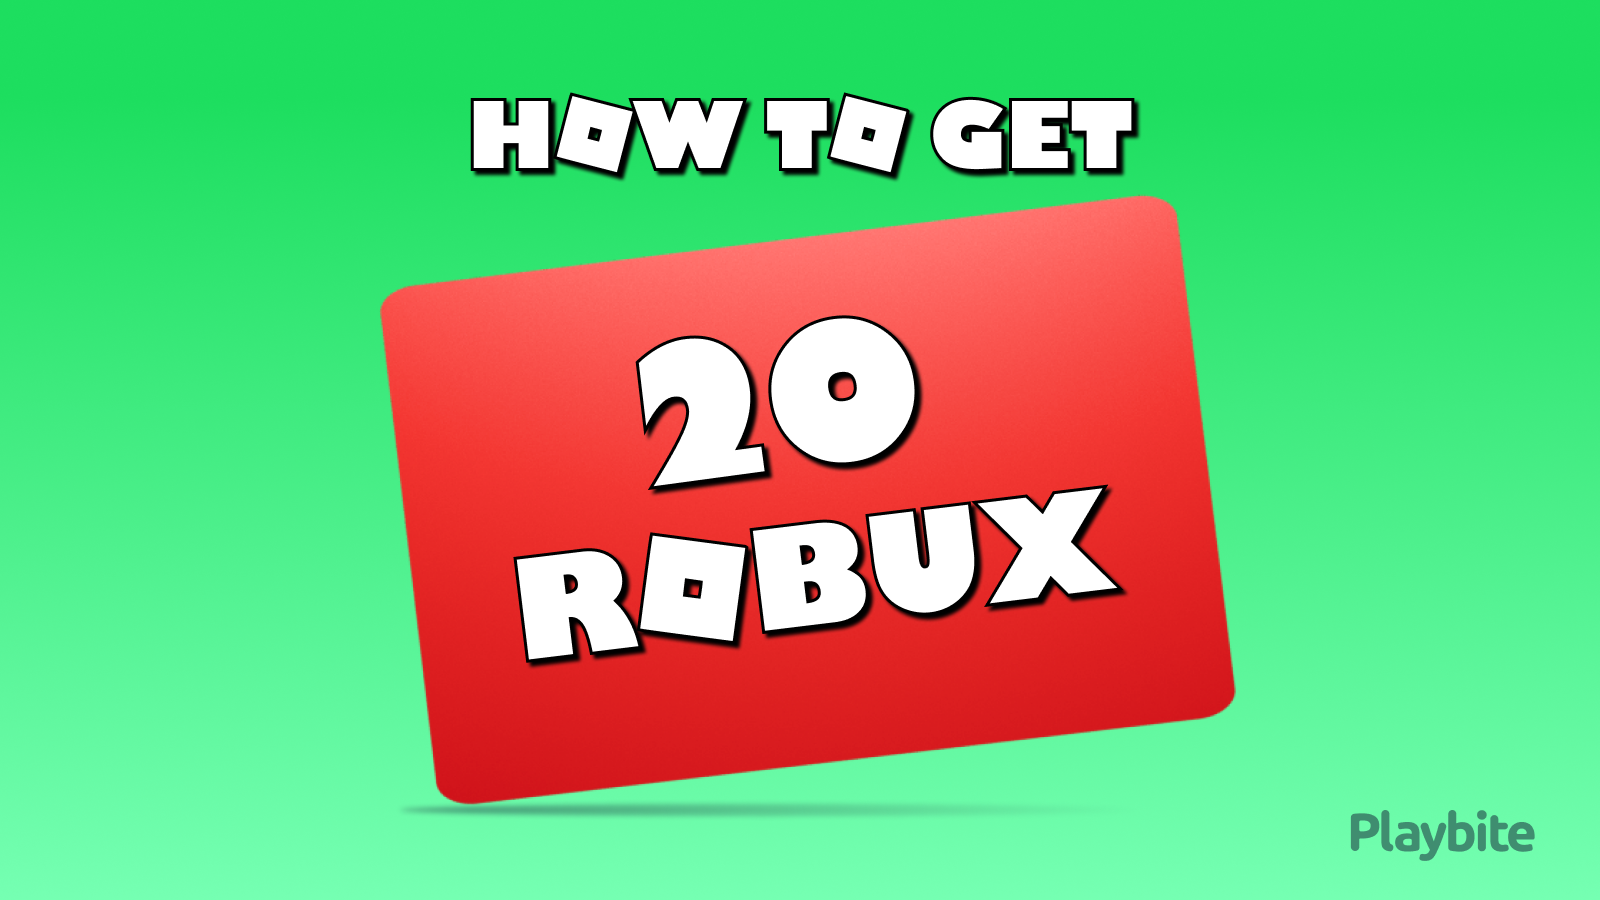 How To Get 20 Robux For Free